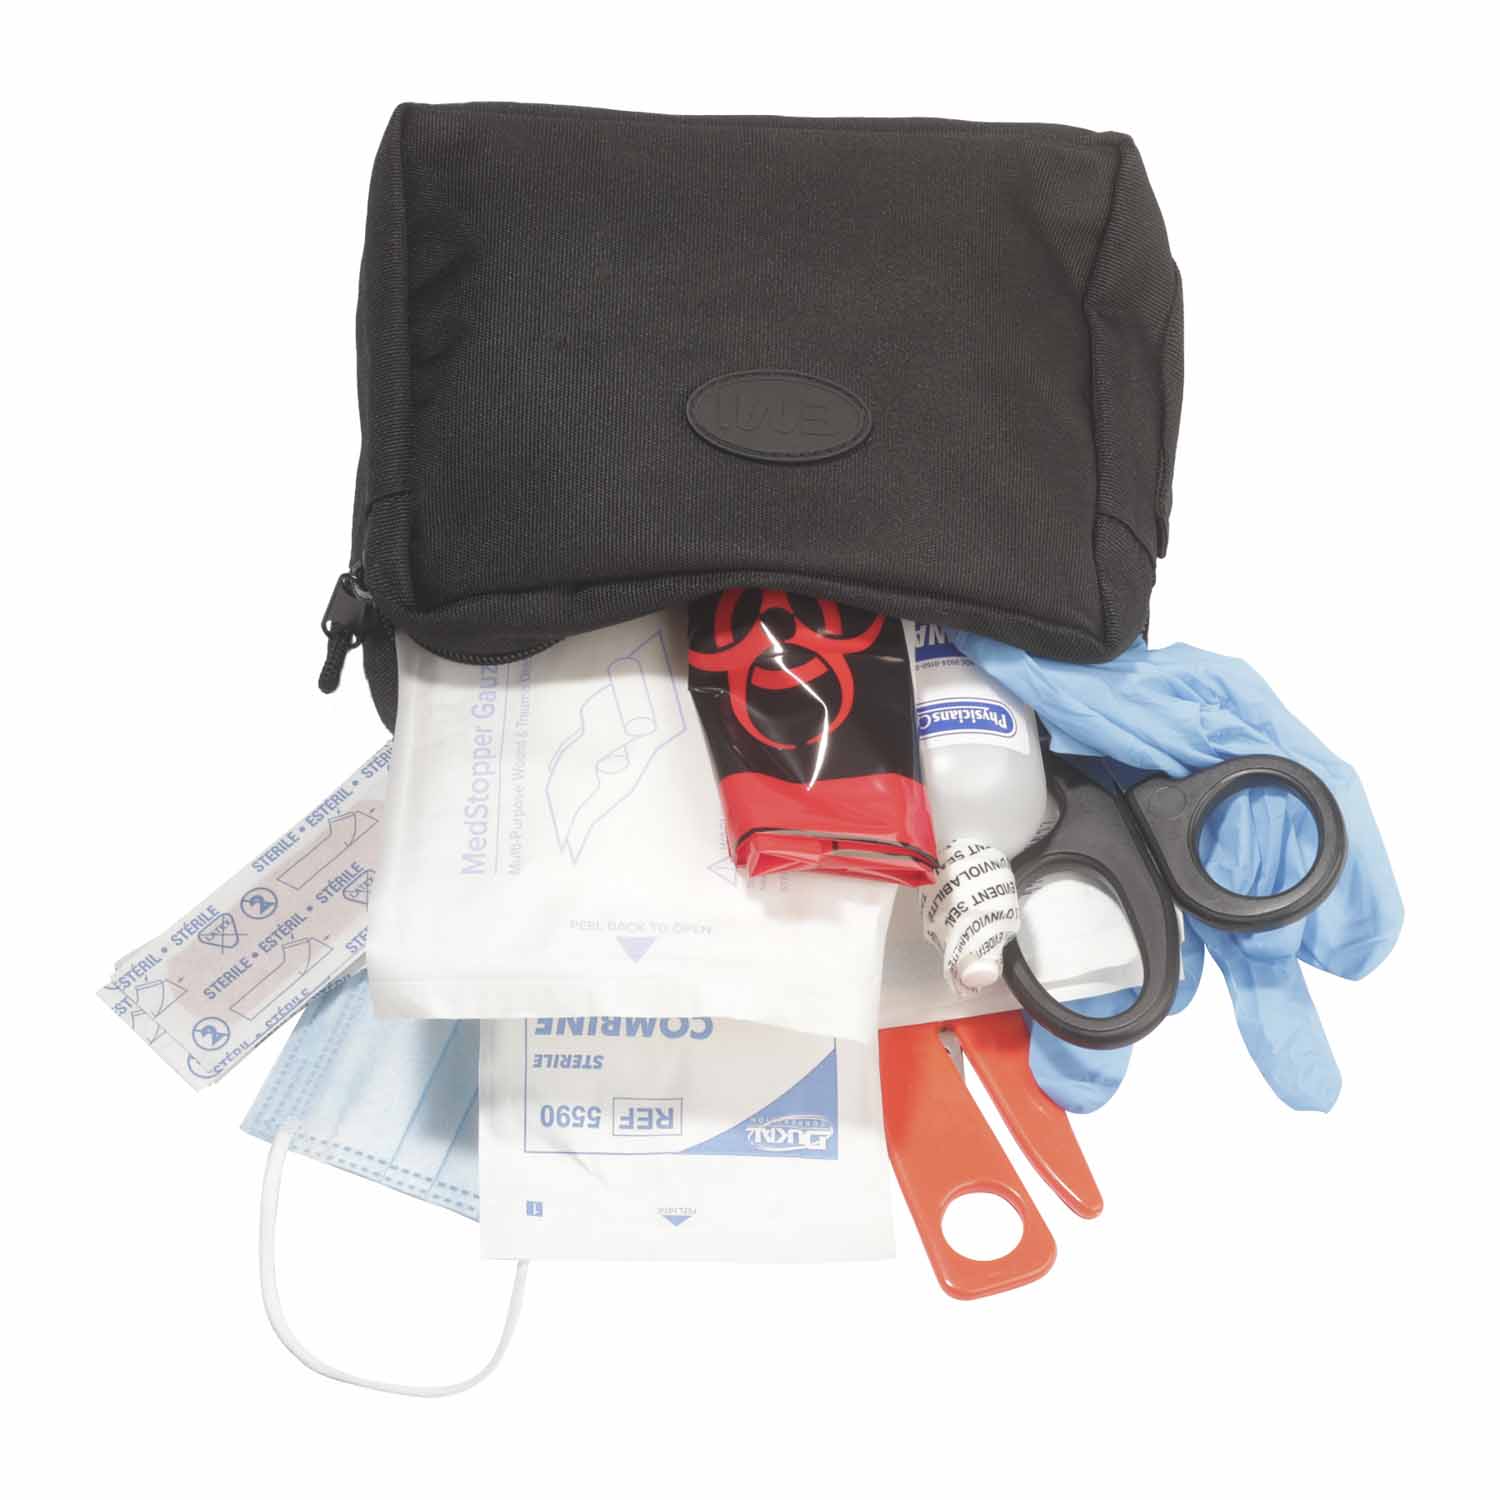 Galls MOLLE Pac Trauma Kit in EMI Pouch